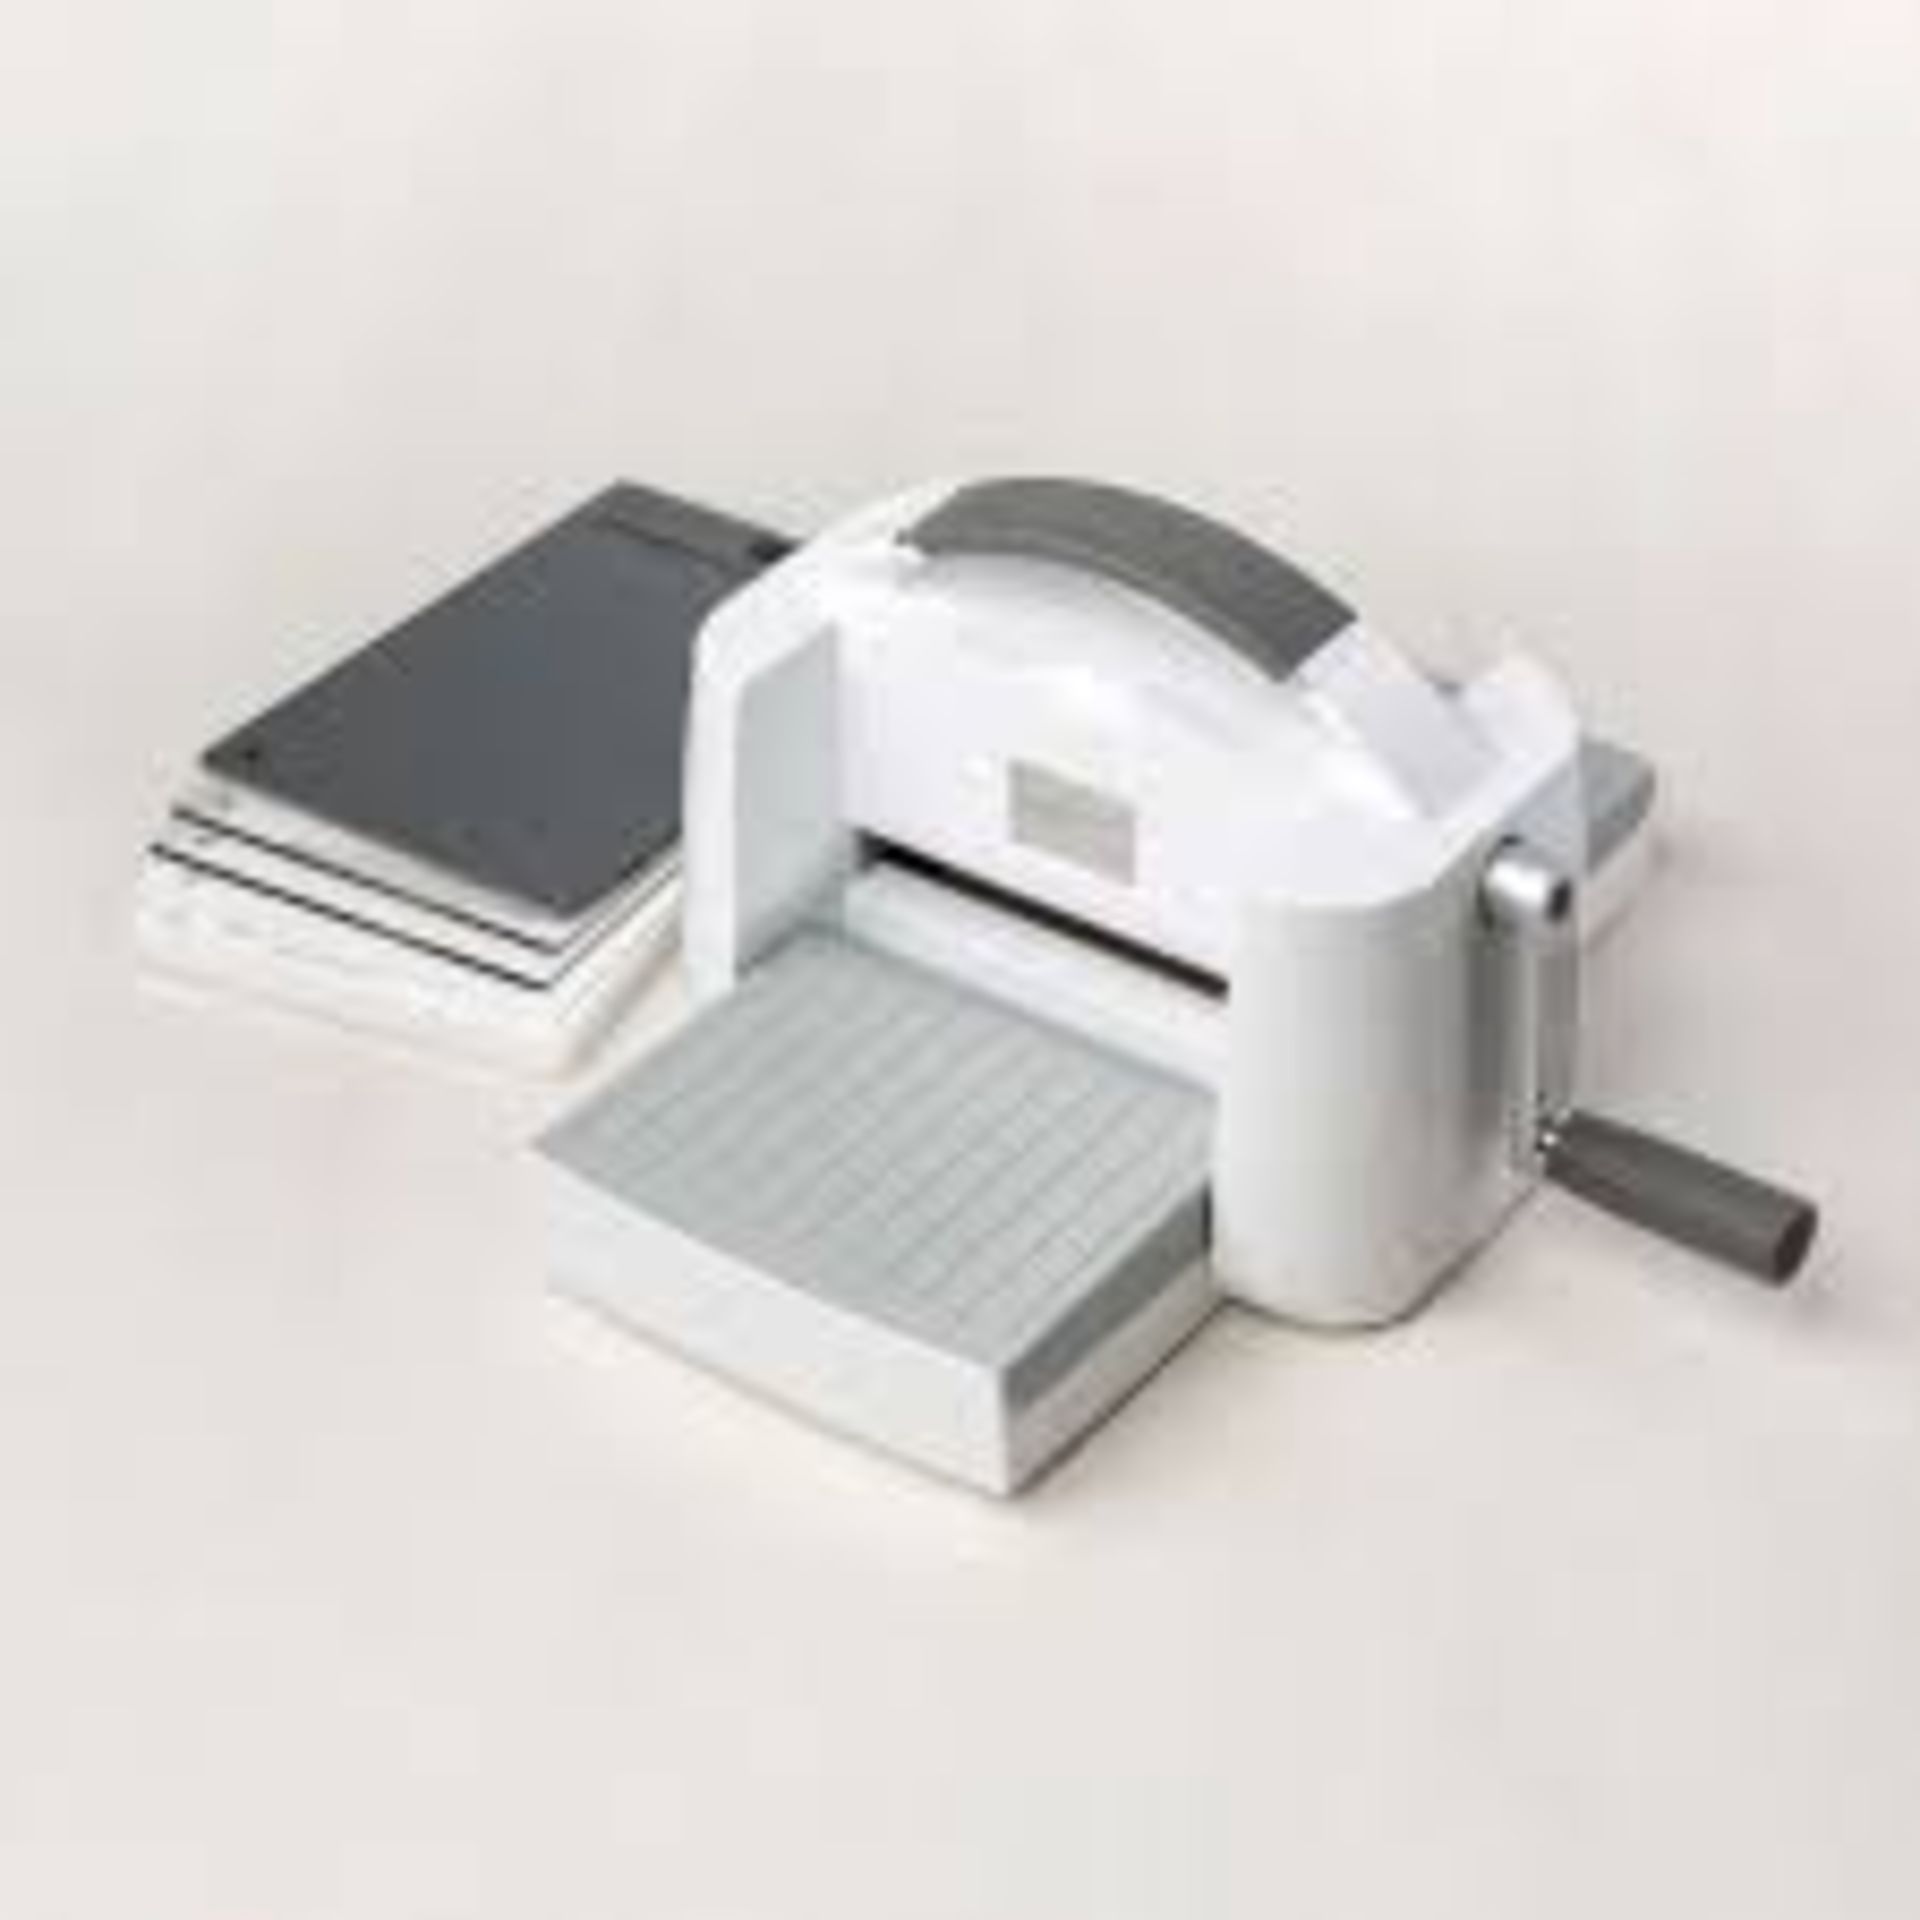 BRAND NEW STAMPIN UP CUT AND EMBOSS MACHINES RRP £149 EACH